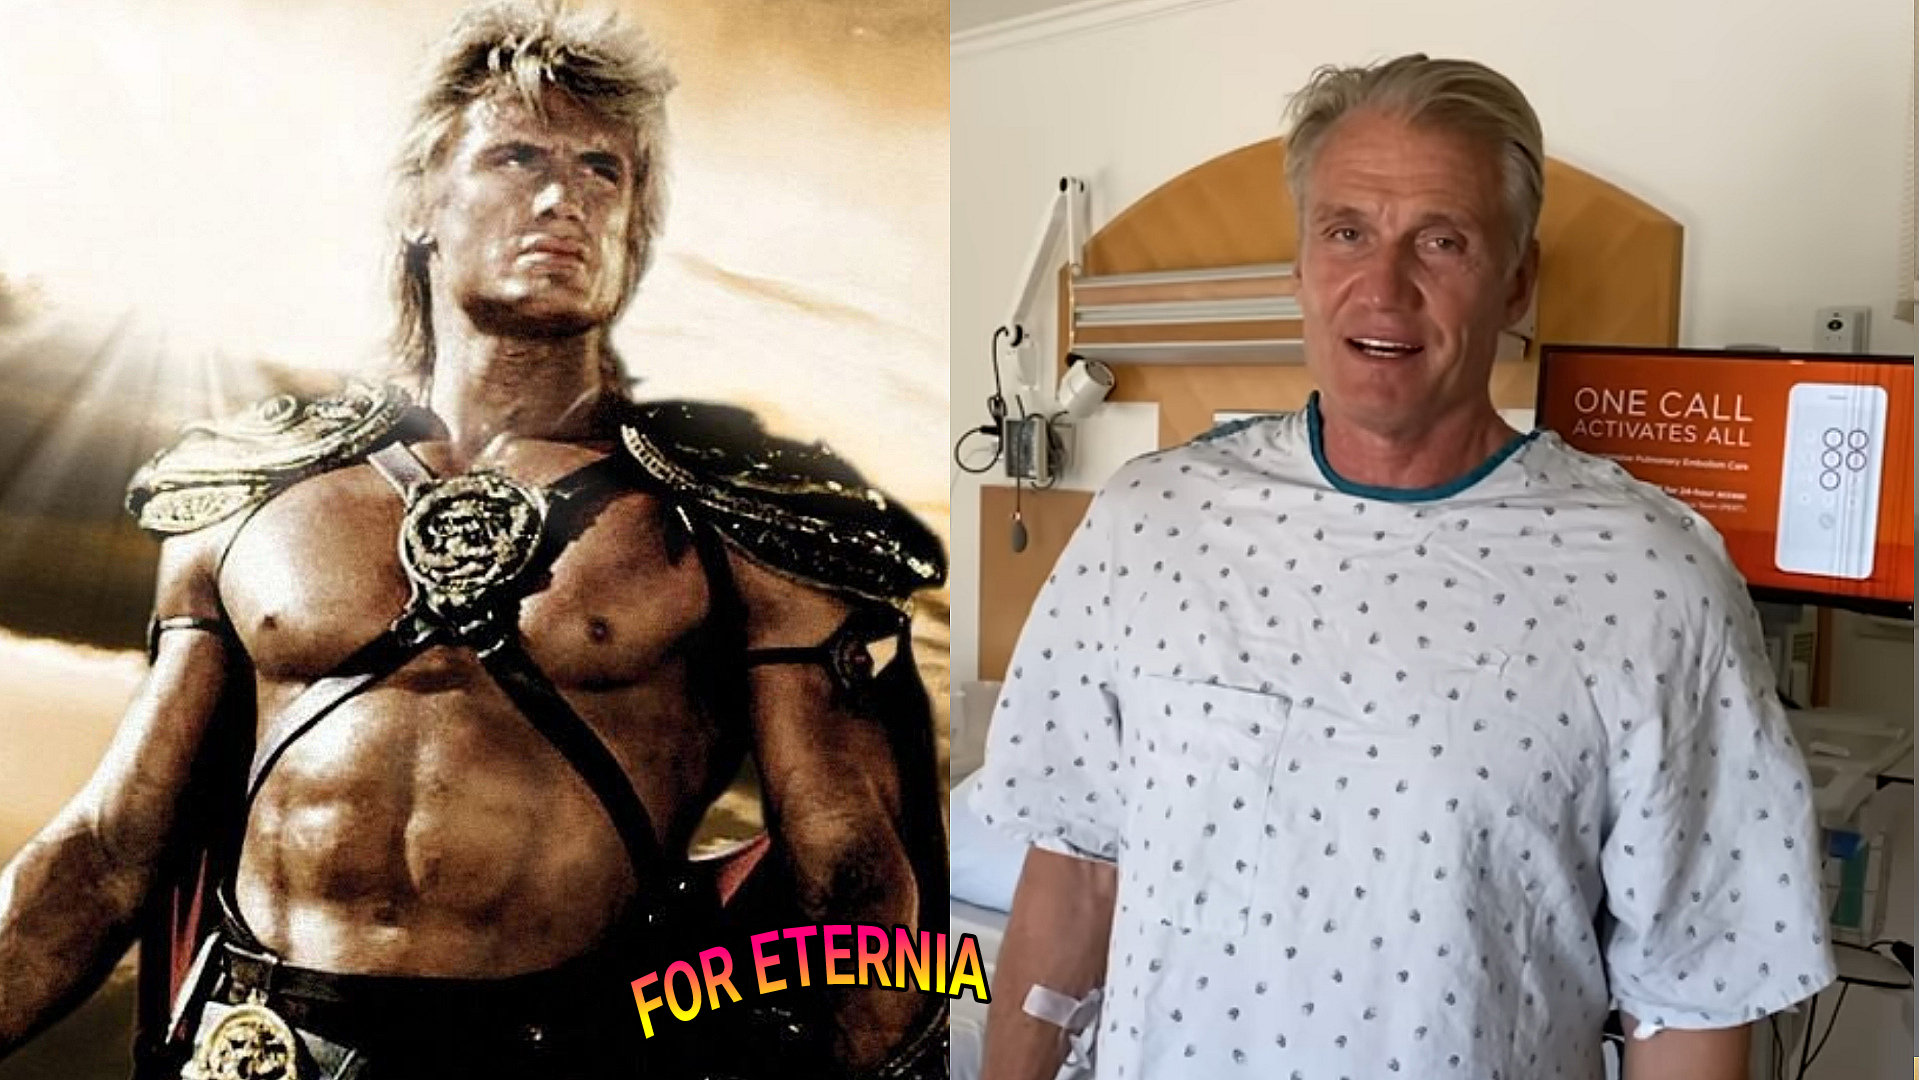 He-Man actor Dolph Lundgren opens up about his battle with cancer to help people